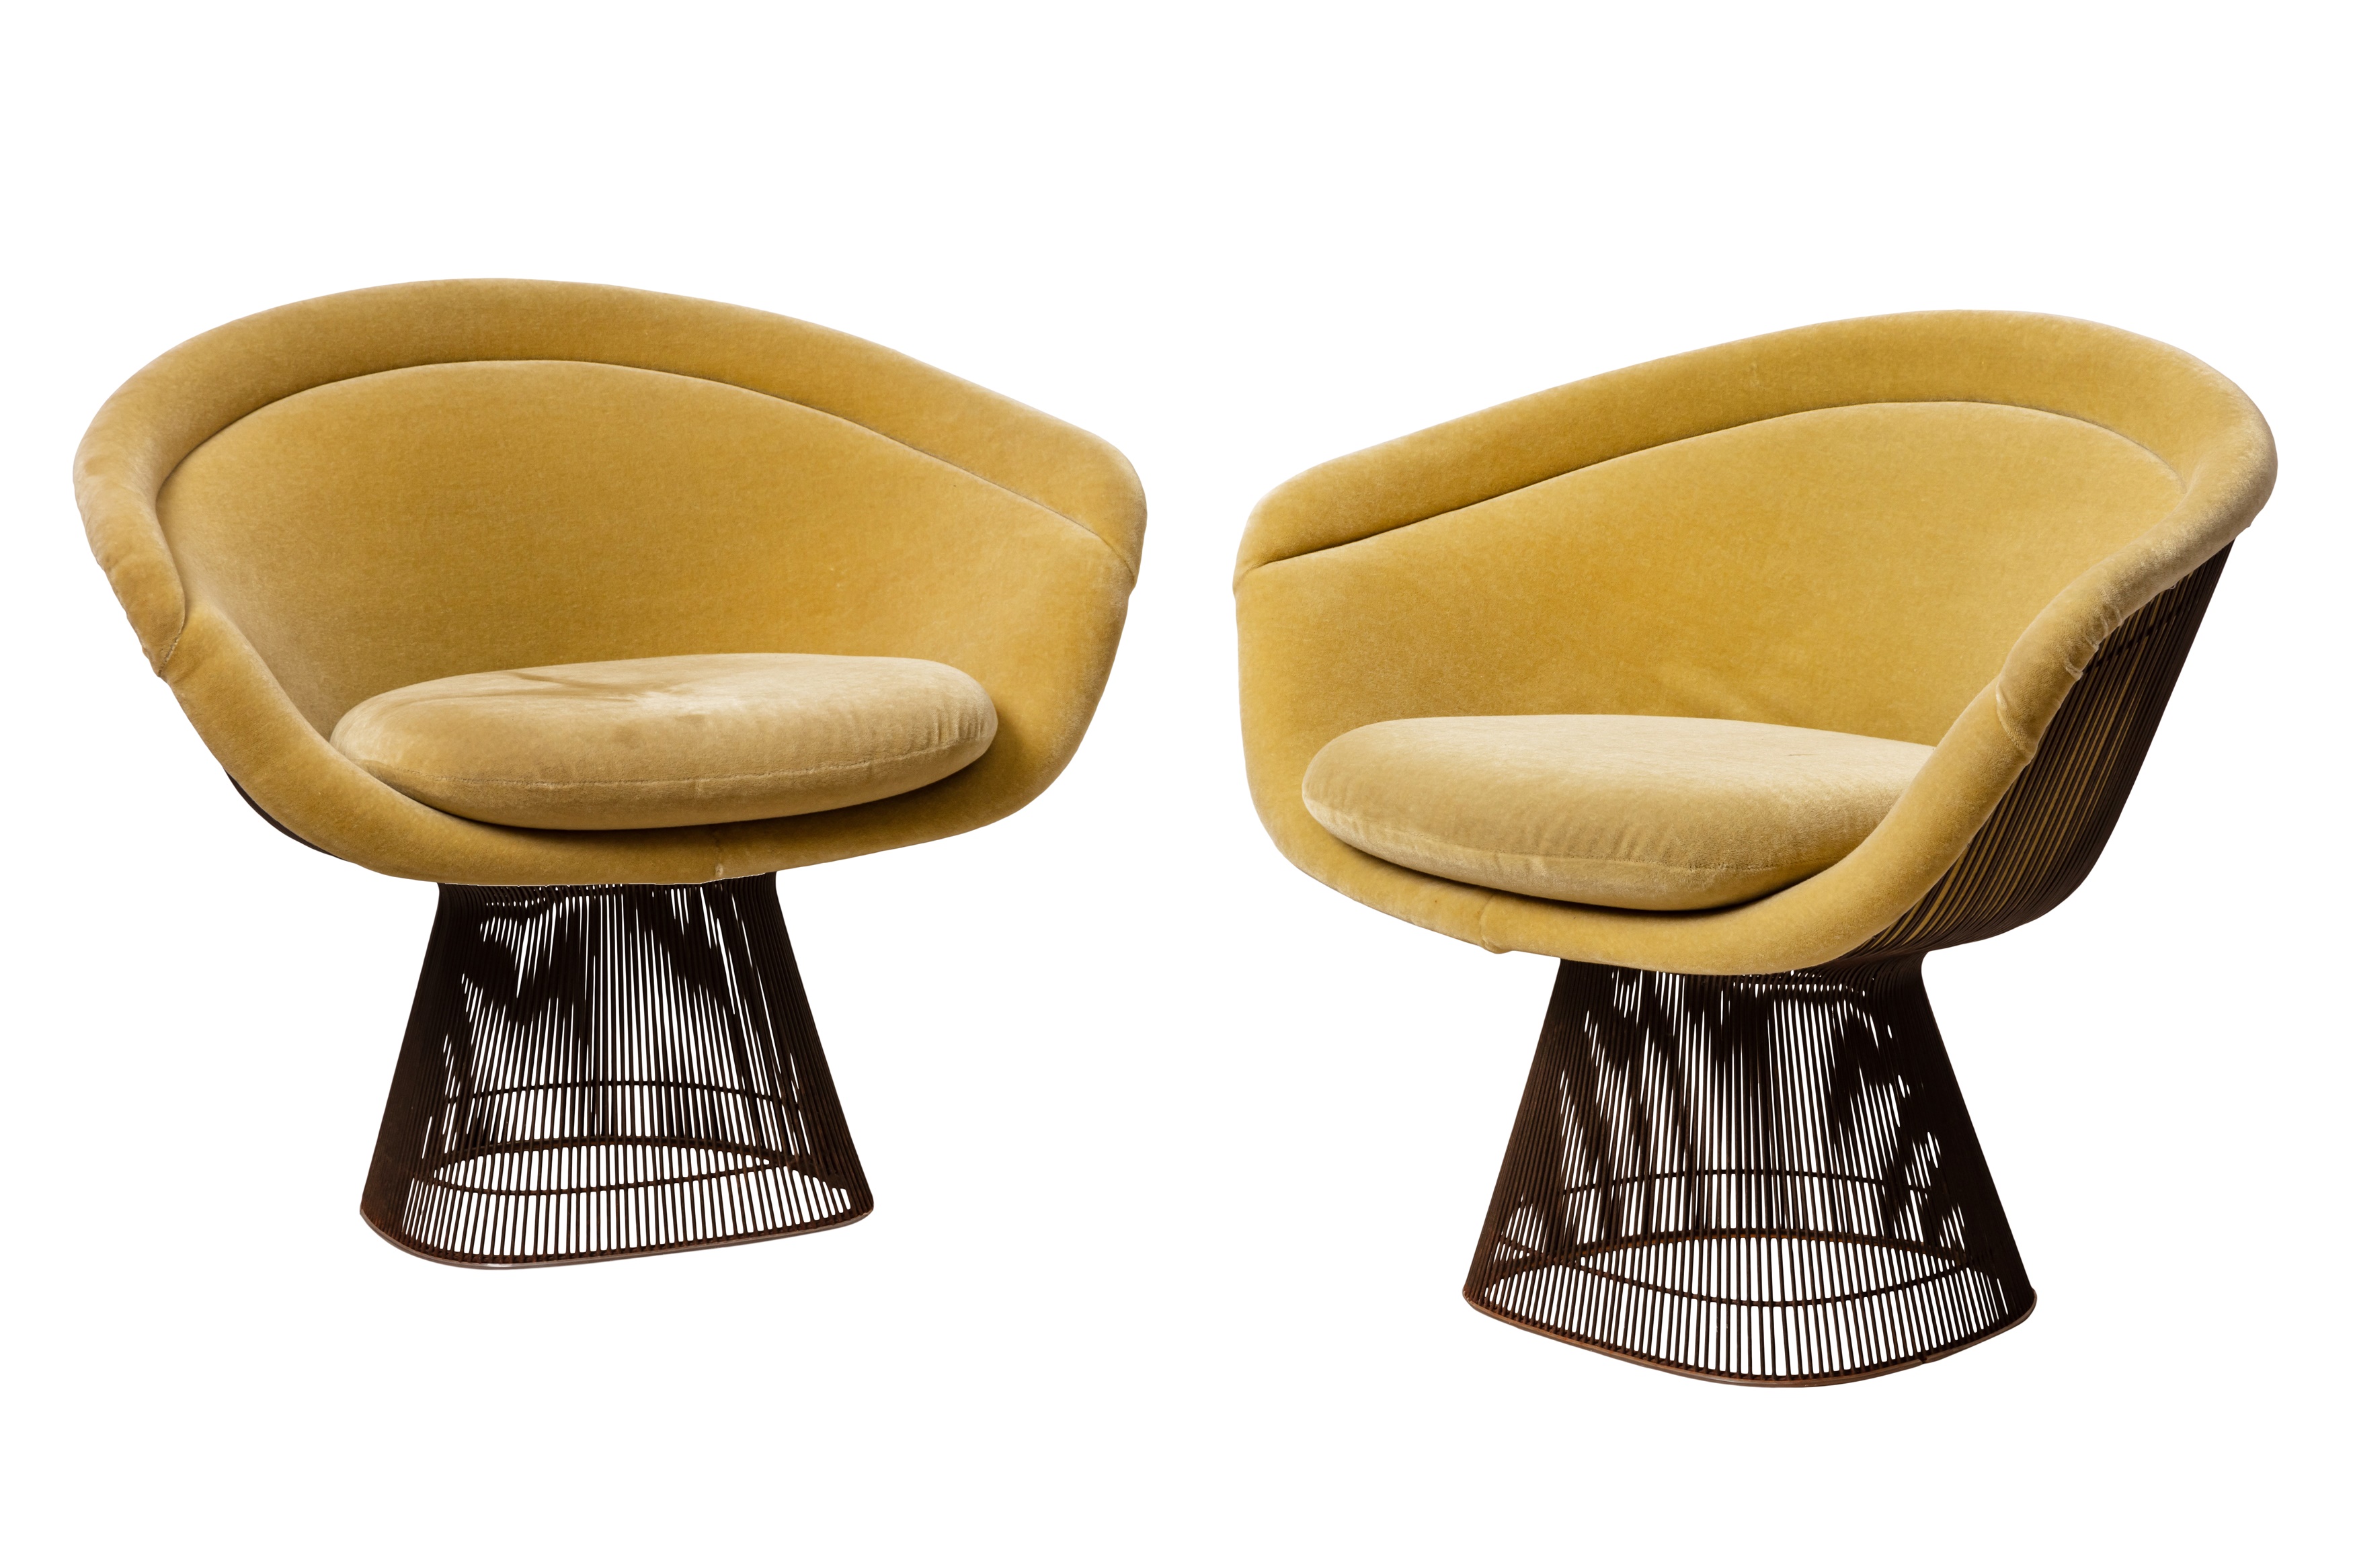 WARREN PLATNER (AMERICAN 1919-2006) FOR KNOLL INTERNATIONAL Preview: Barley Mow Centre - Image 2 of 13